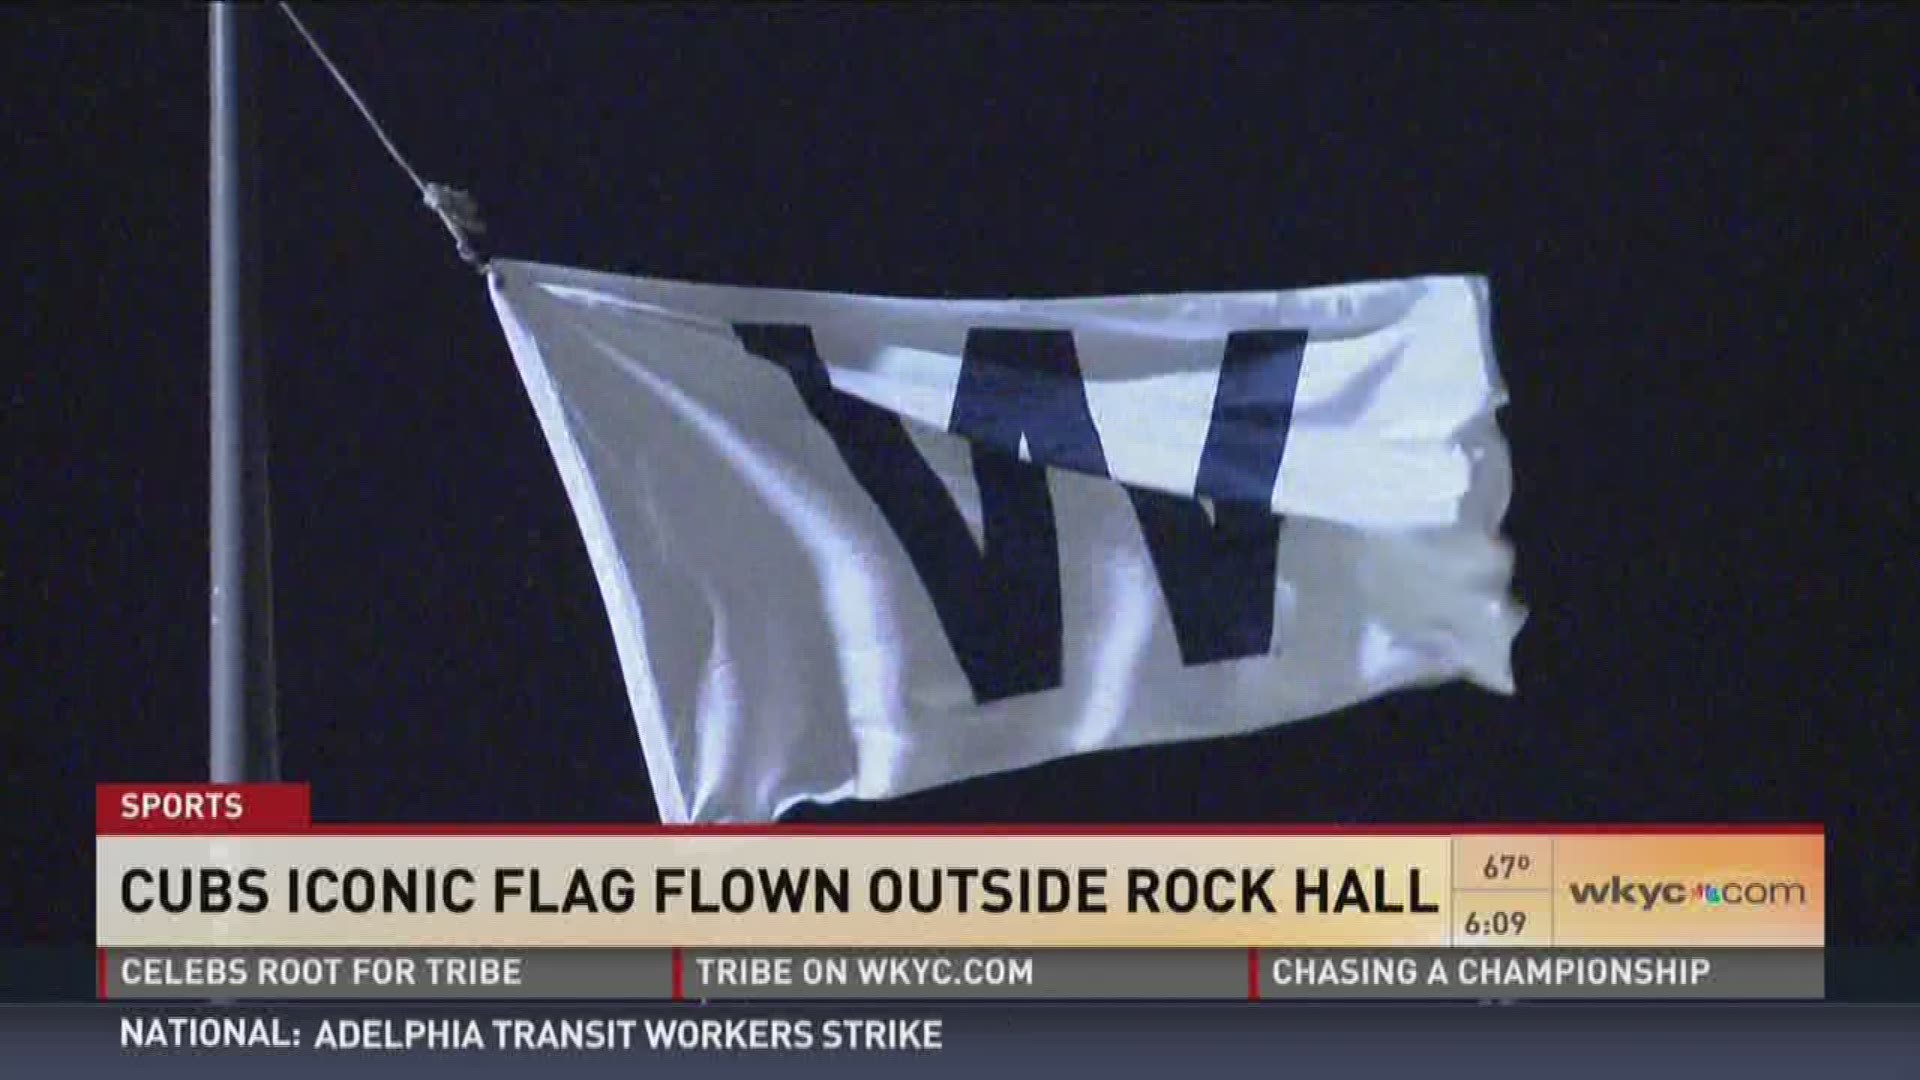 Chicago Cubs fan raises 'W' flag above Rock and Roll Hall of Fame